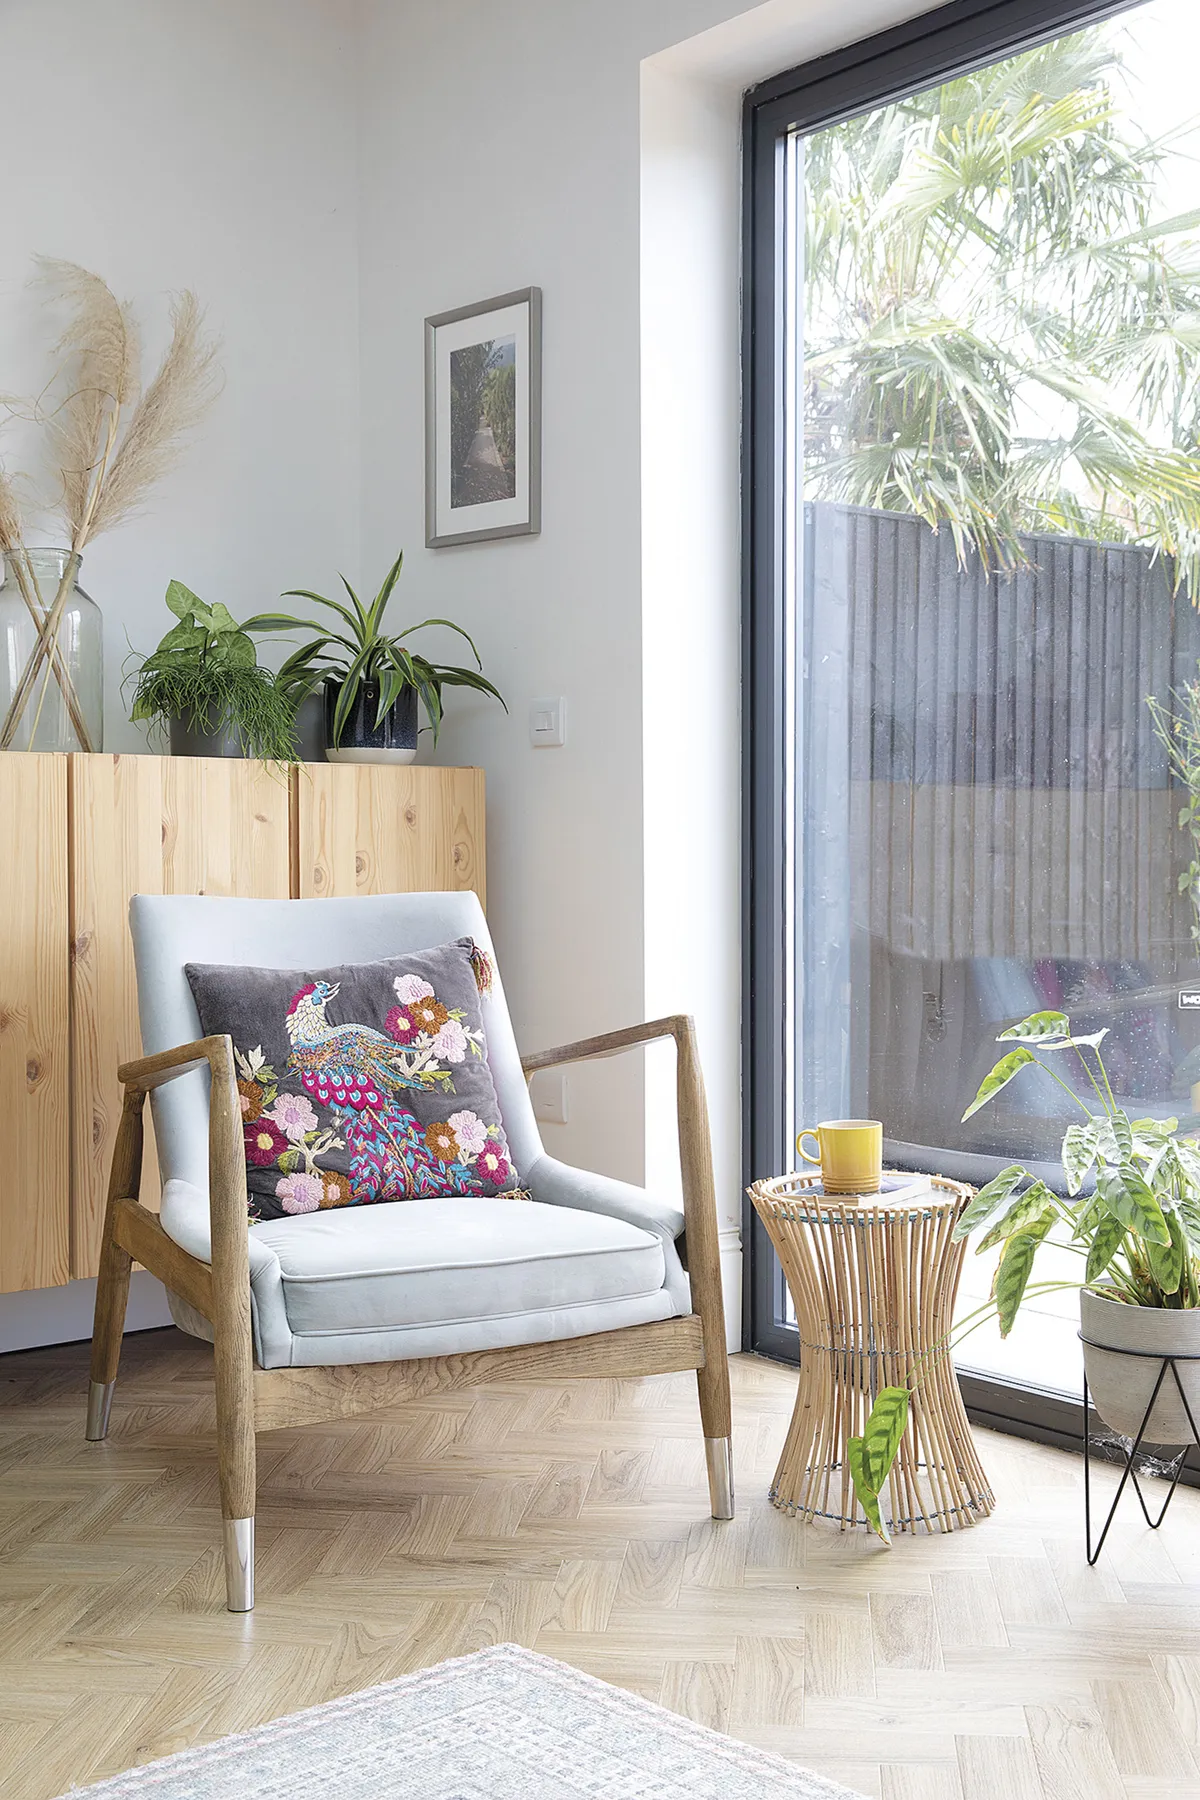 ‘The chair and cushion are from HomeSense – one of my favourite stores – and I found the bargain plant stand in Søstrene Grene. It makes a great little side table’